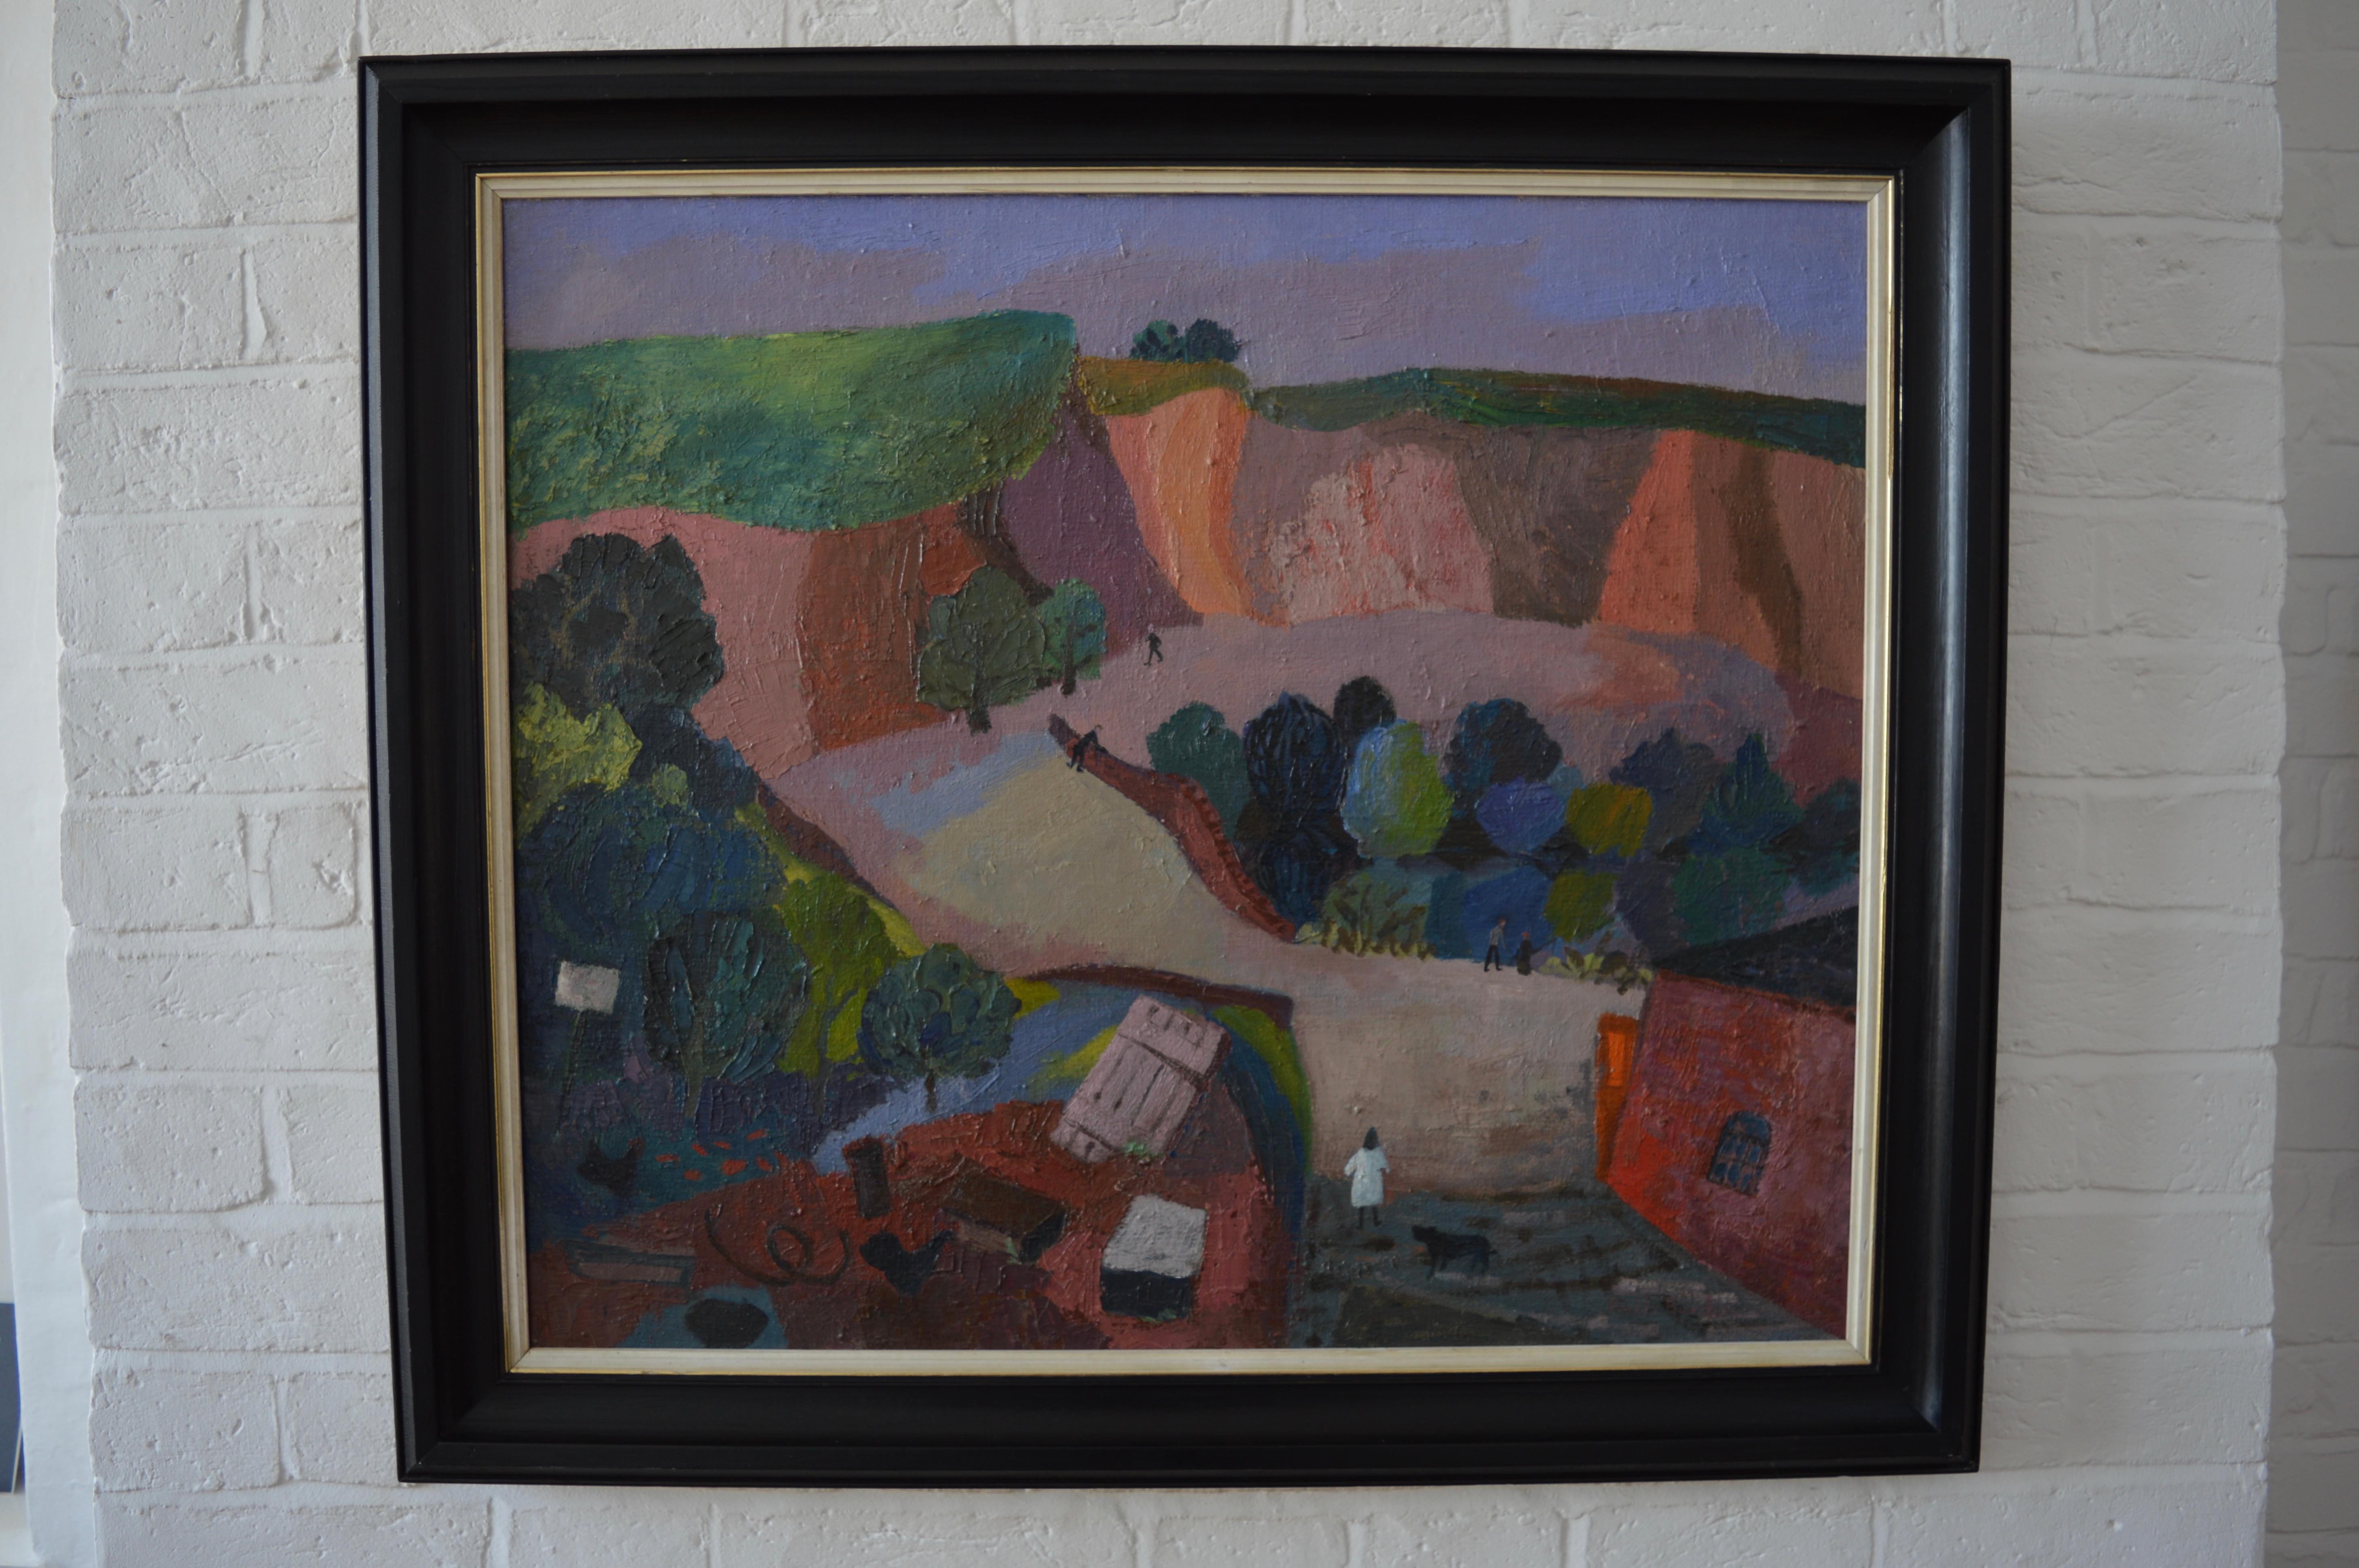 Modernist landscape, The road through the village - Painting by Ruth Burden